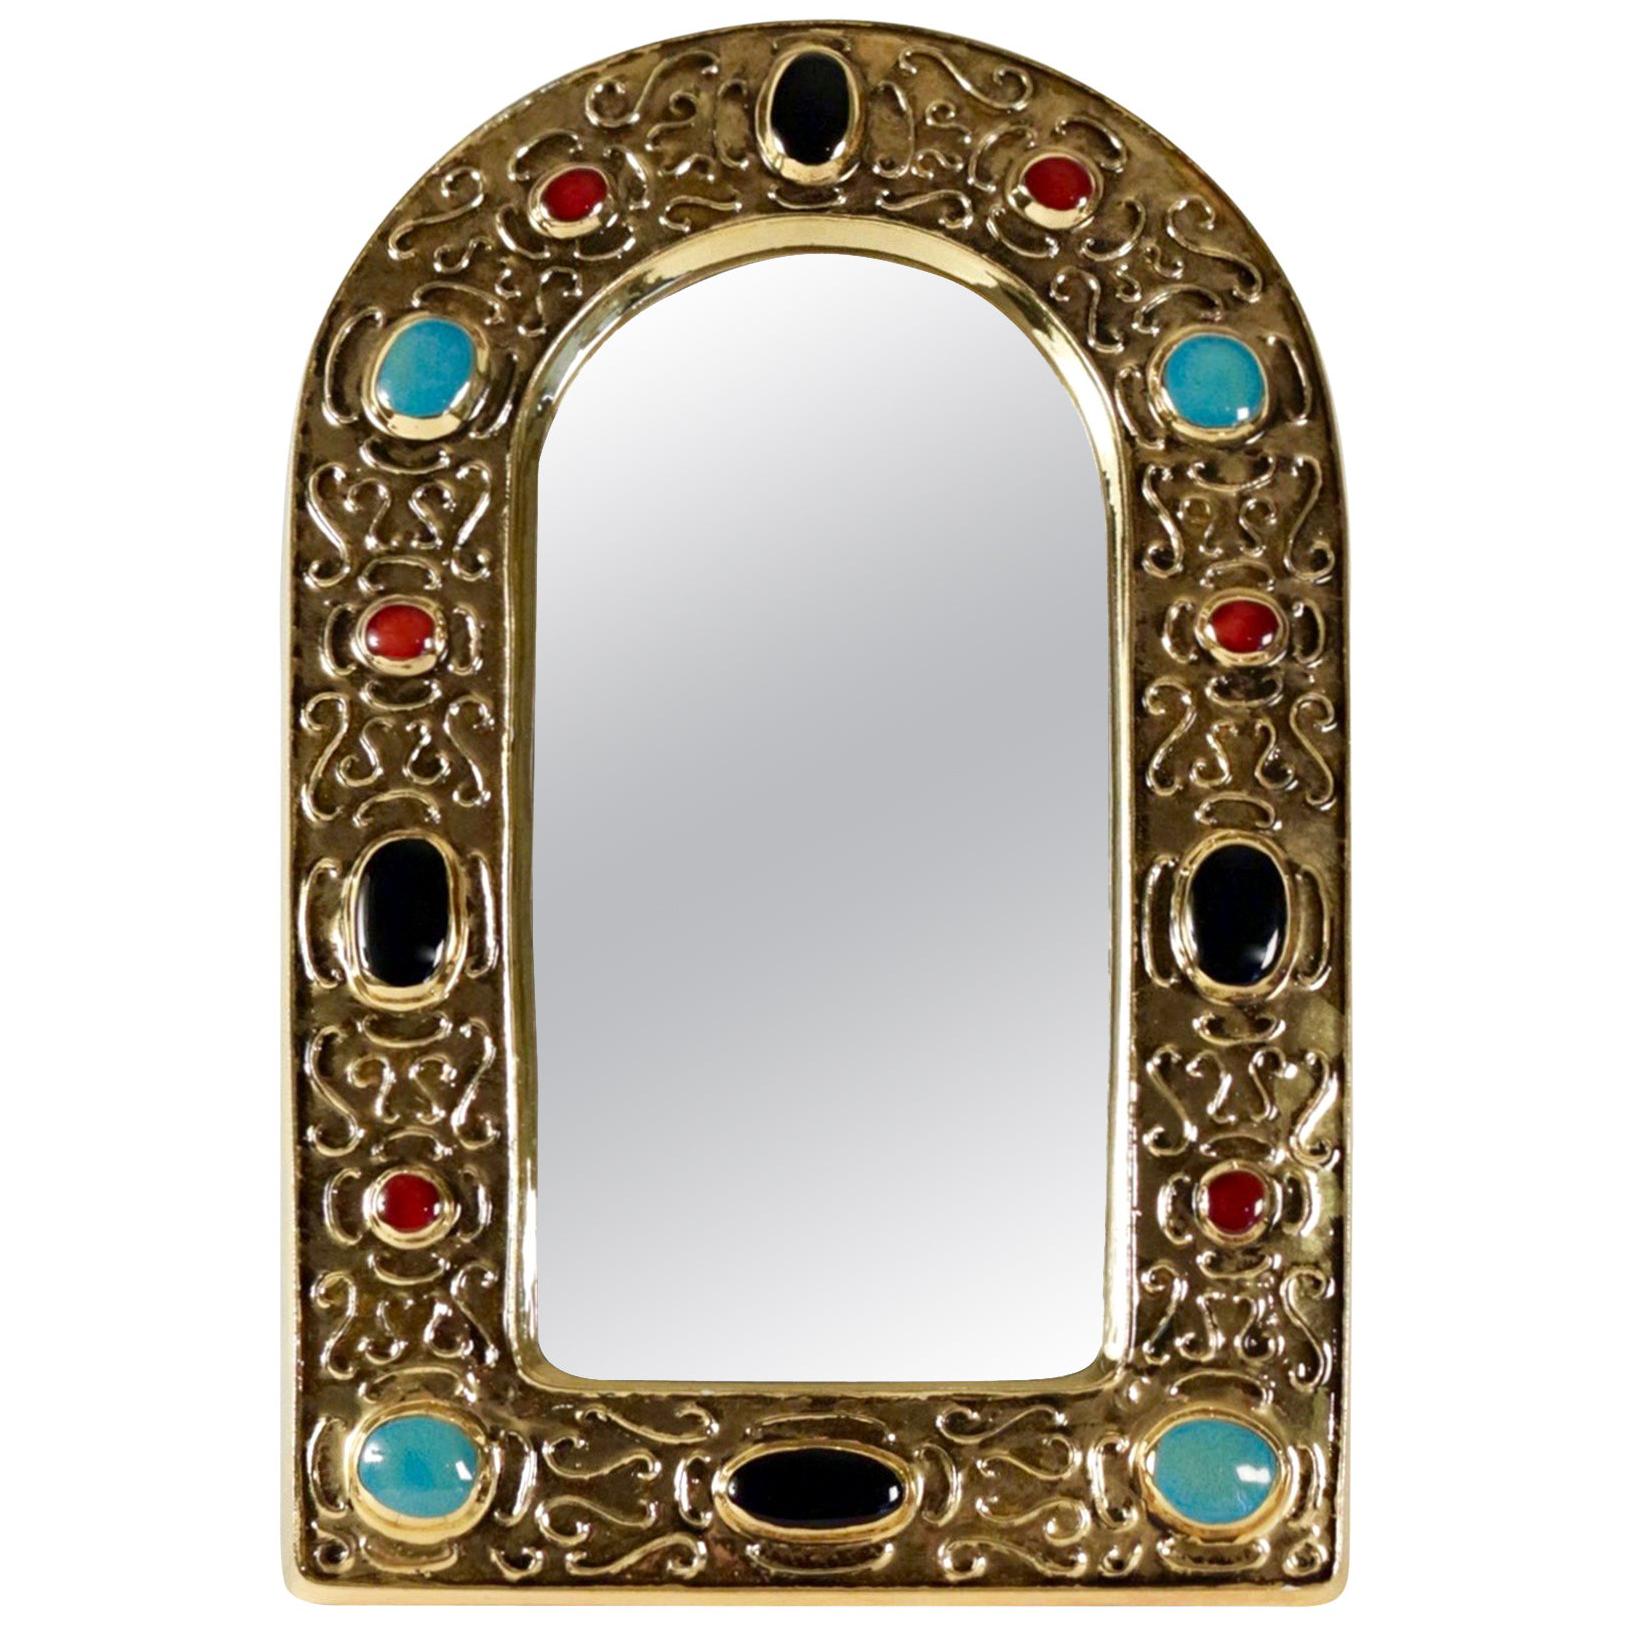 "Jewel mirror" in gilded enameled ceramic dating from the 1960s by François Lemb